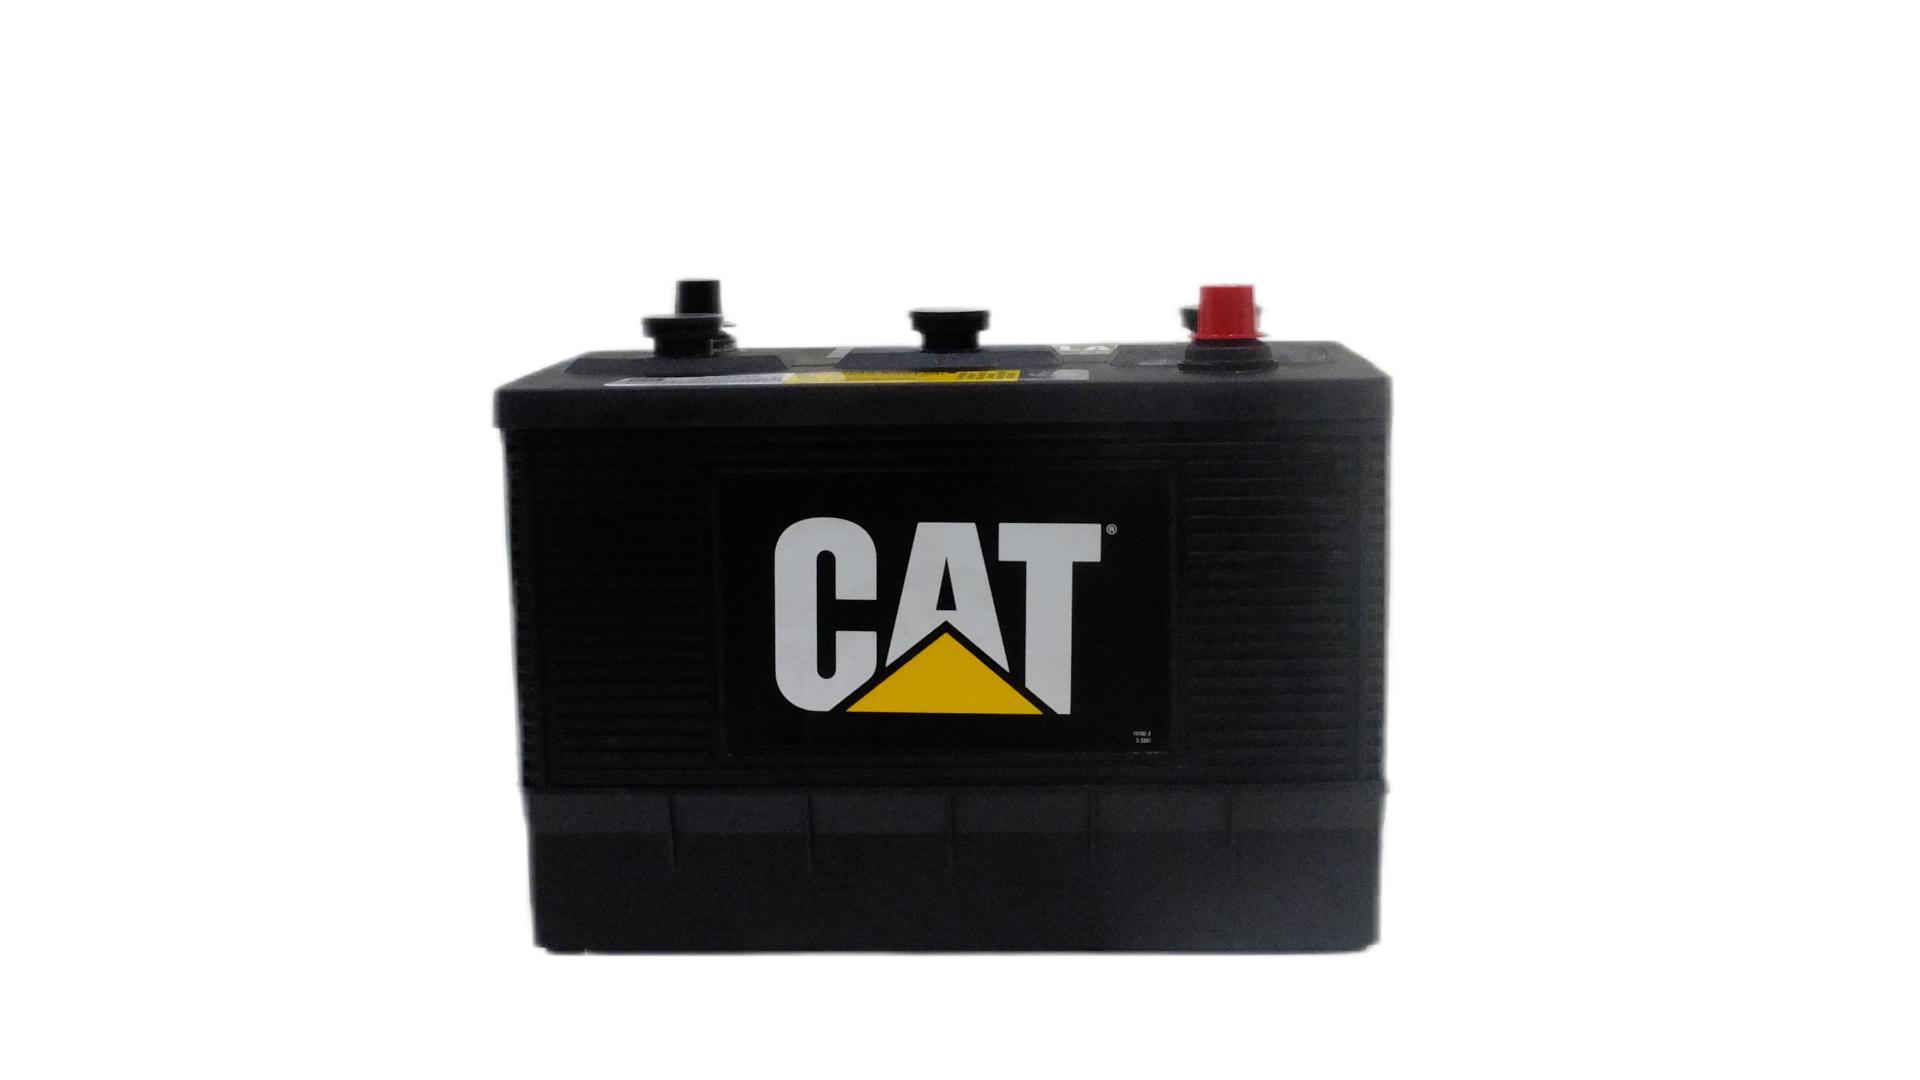 8C-3633 CAT Battery 6V BCI WET BATTERY 6-Volt 4 BCI General Duty Low-Maintenance Wet Battery • 975 cold-cranking amps • 250 reserve capacity minutes • 125 amp hour capacity • 4 BCI group size